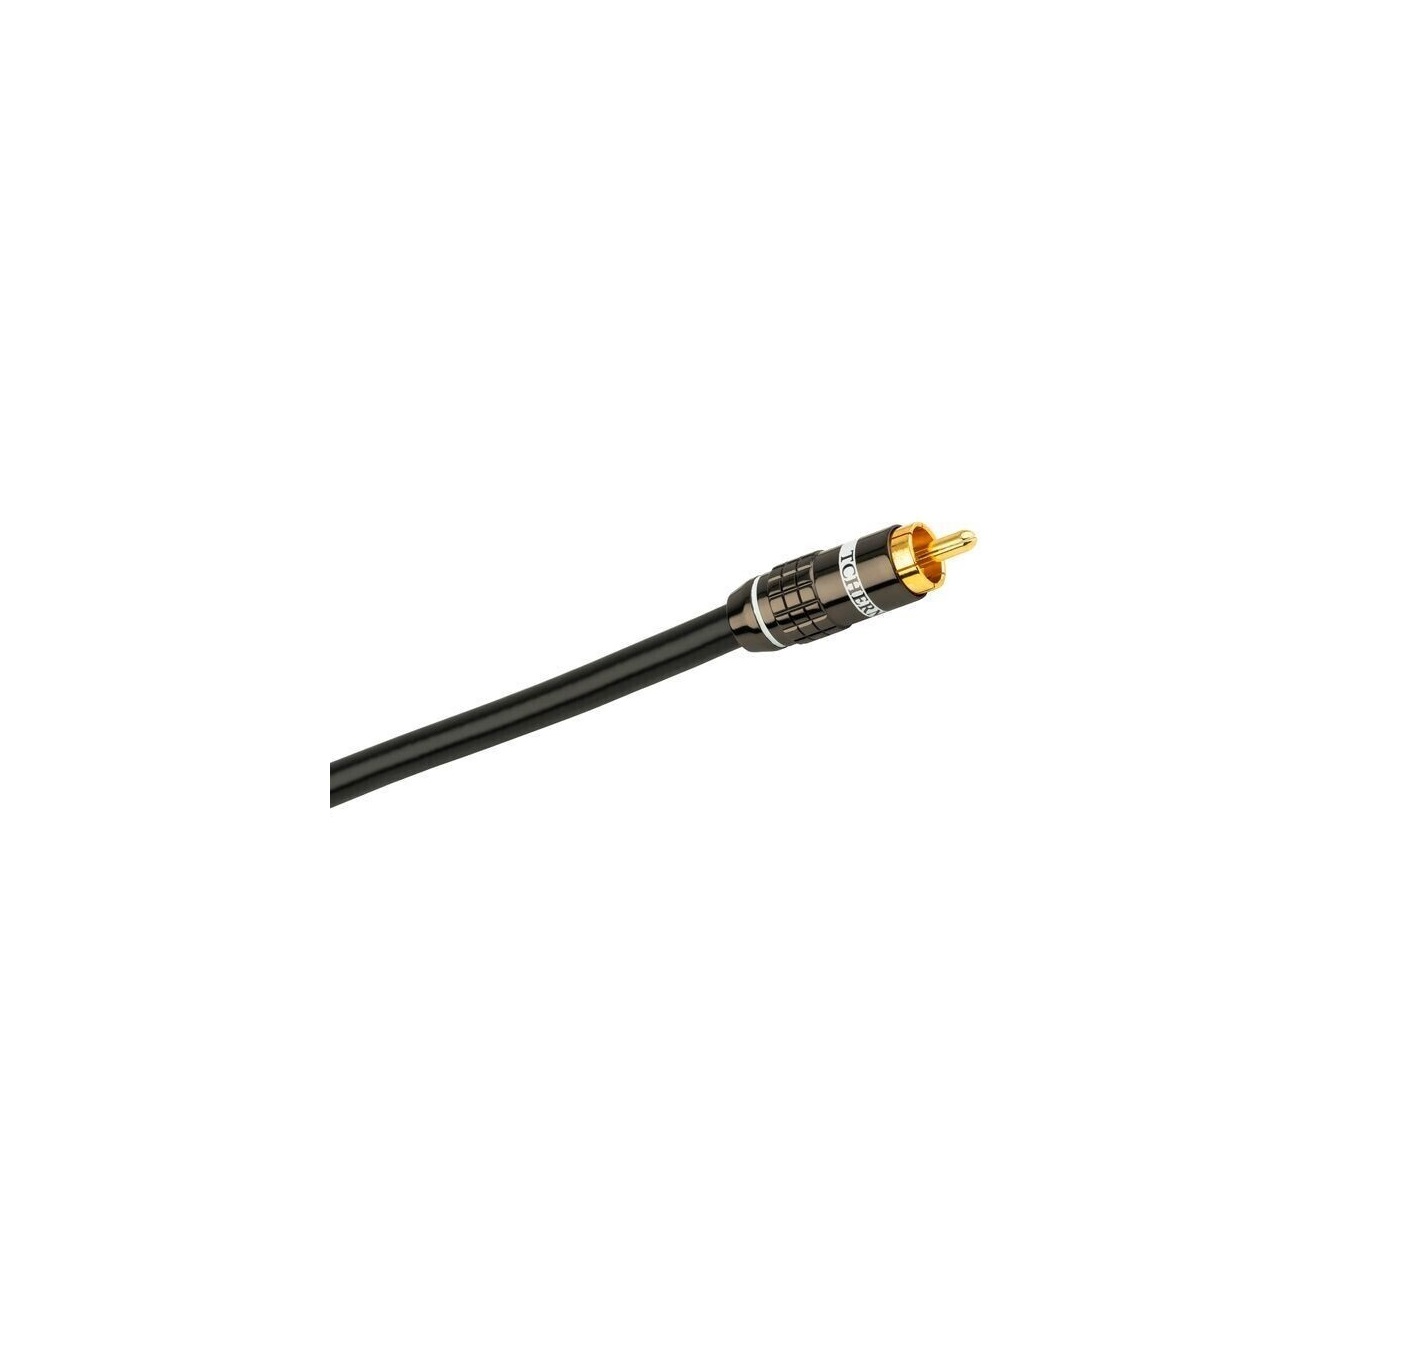 Кабели межблочные аудио Tchernov Cable Standard Balanced IC / Sub RCA (5 m) кабели межблочные аудио tchernov cable special coaxial ic digital rca s pdif 1m